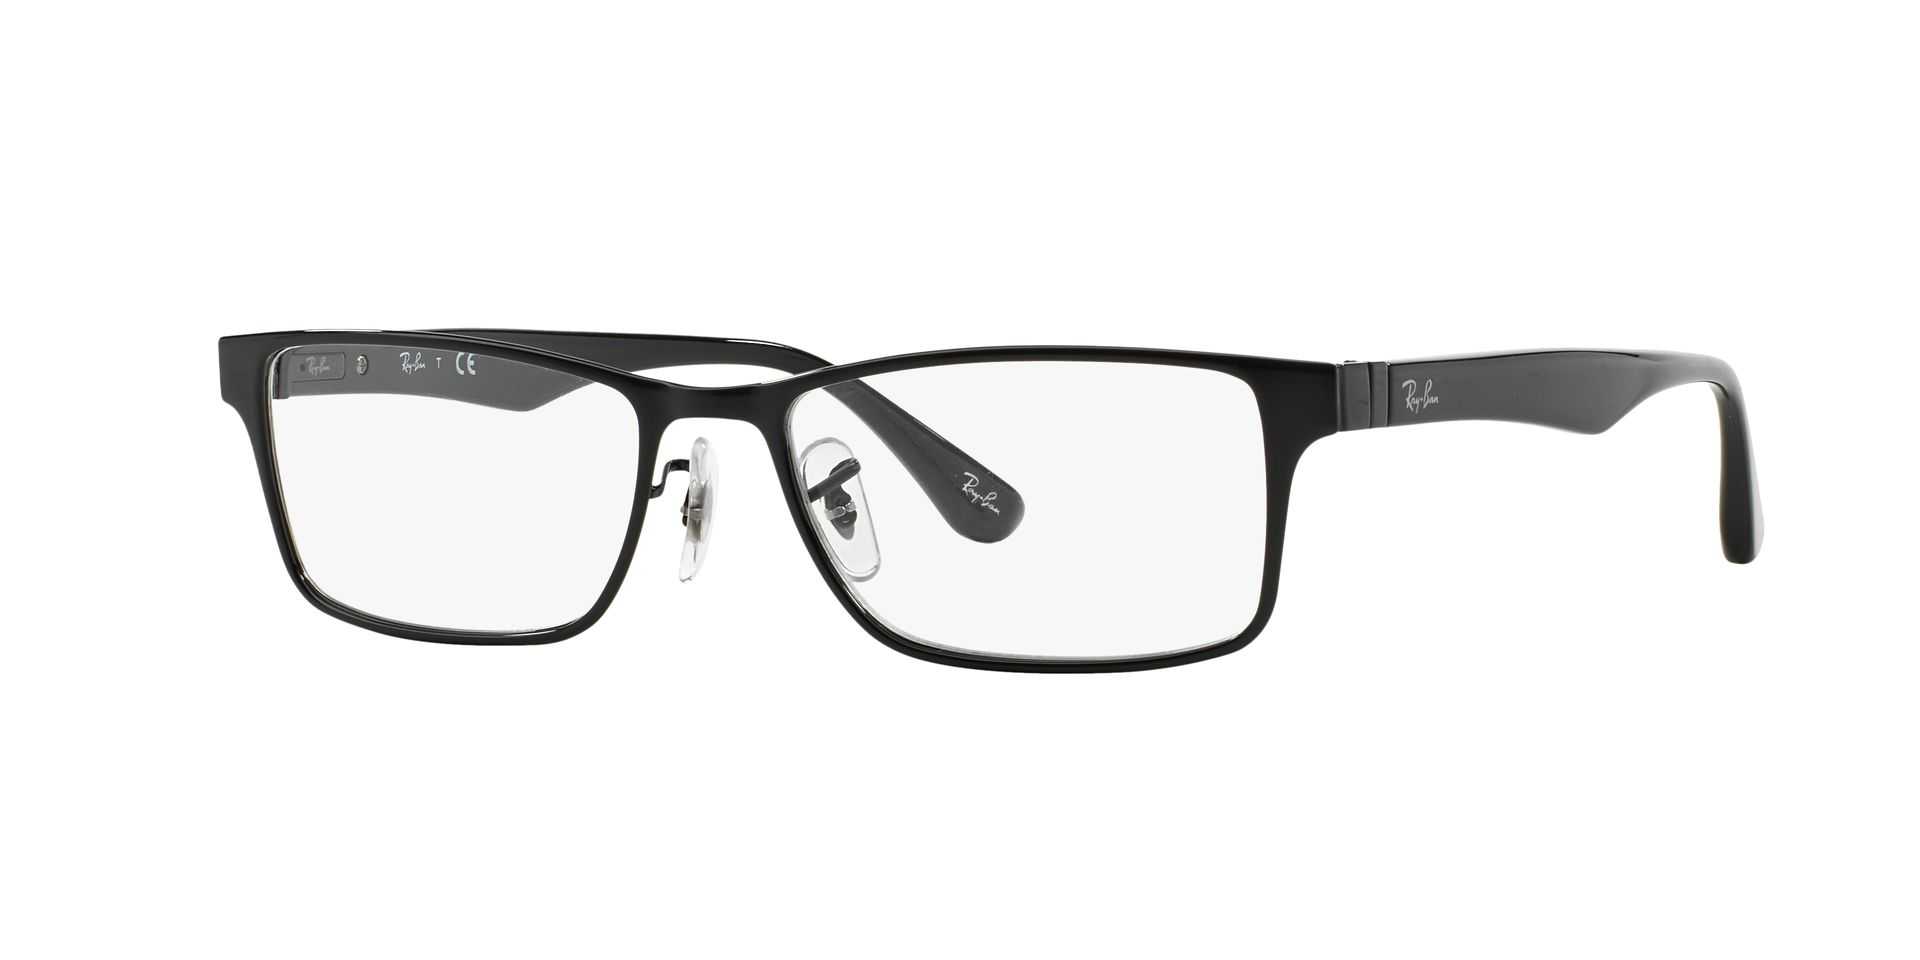 ray ban style glasses frames